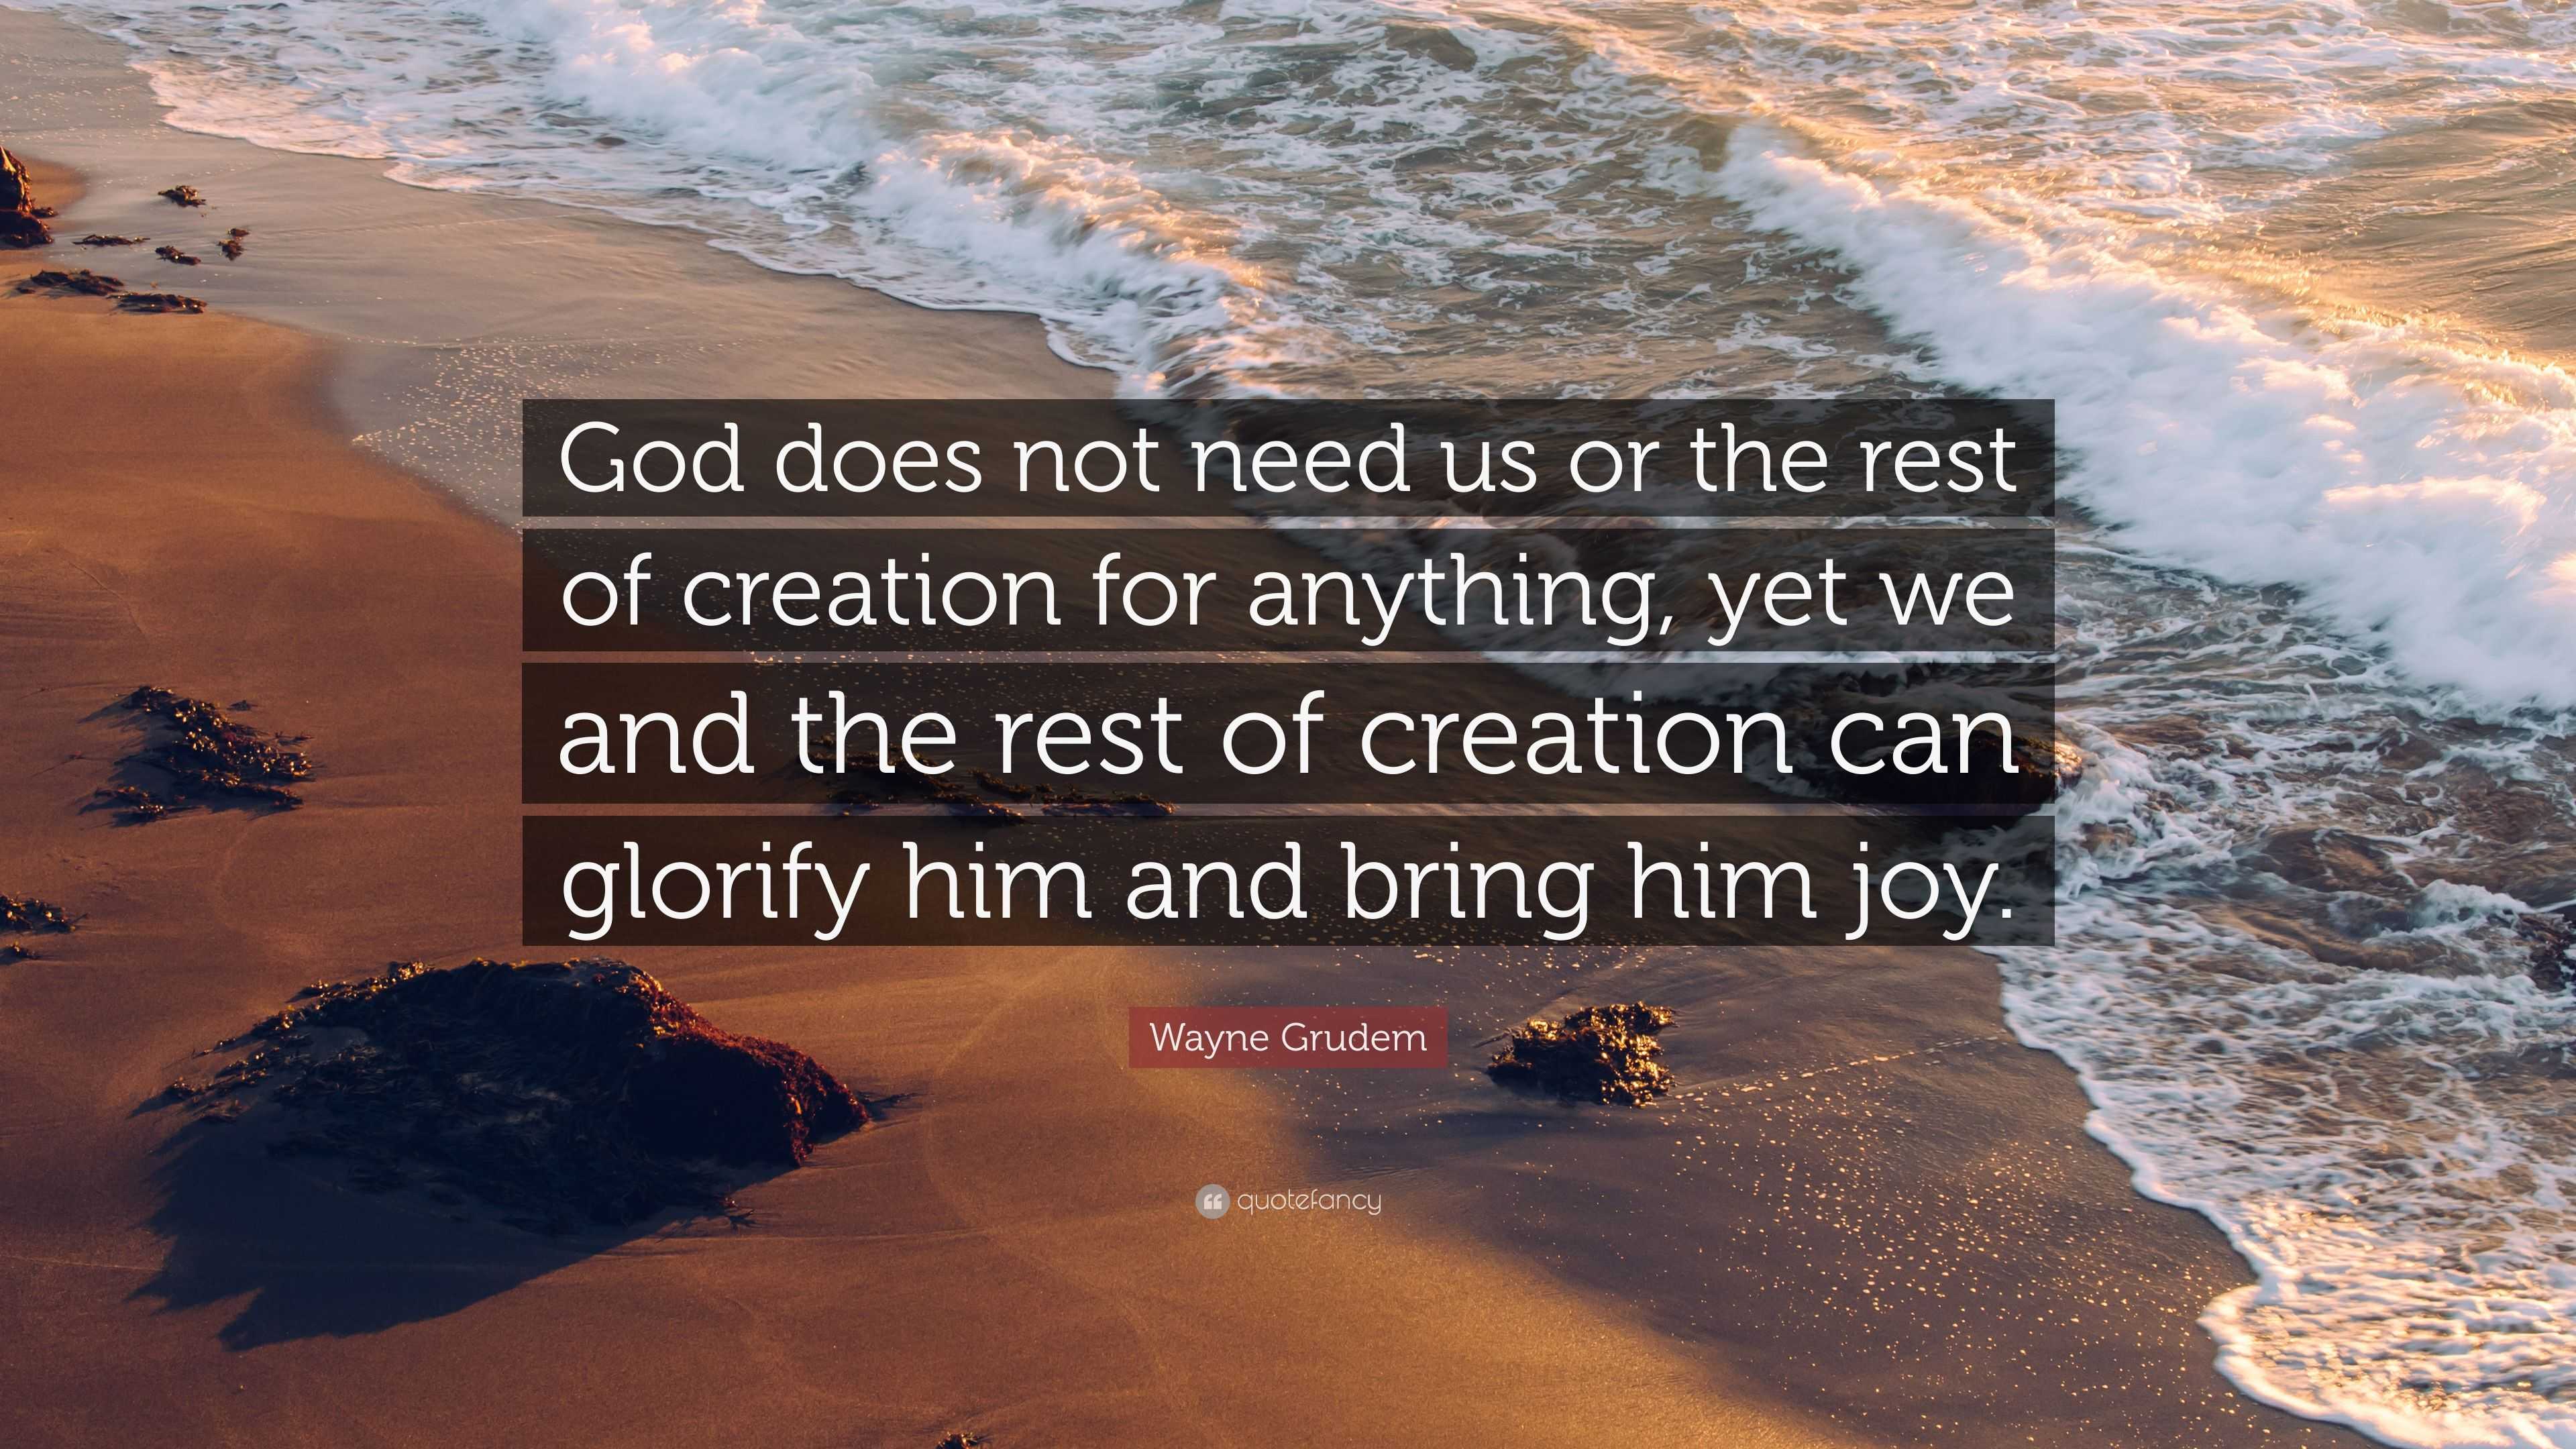 Wayne Grudem Quote: “God does not need us or the rest of creation for ...